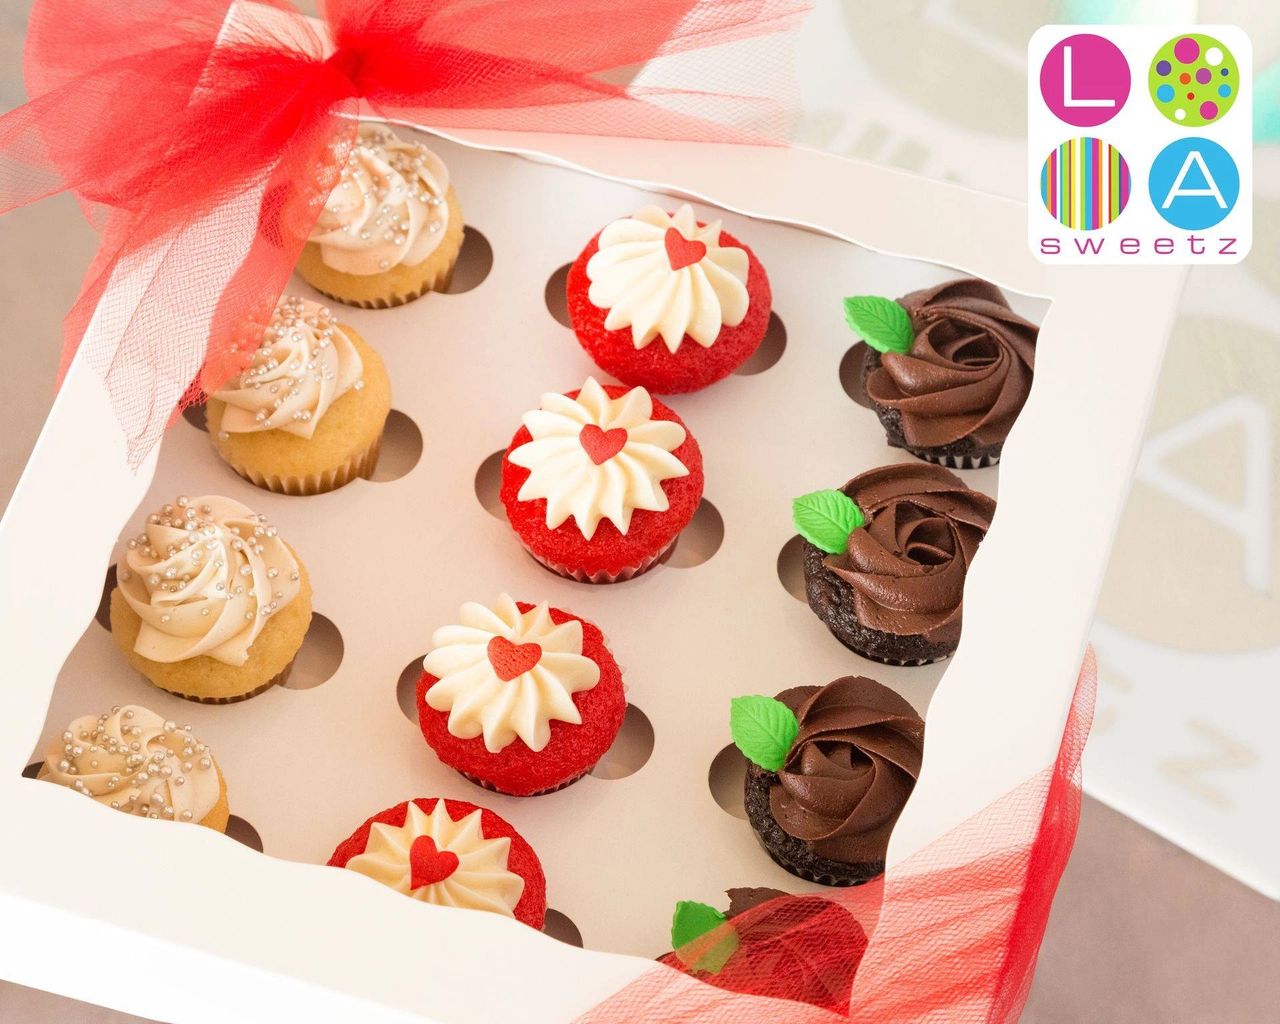 Cupcake Boxes of Love: LA Sweetz Bakery's Valentine's Day Special